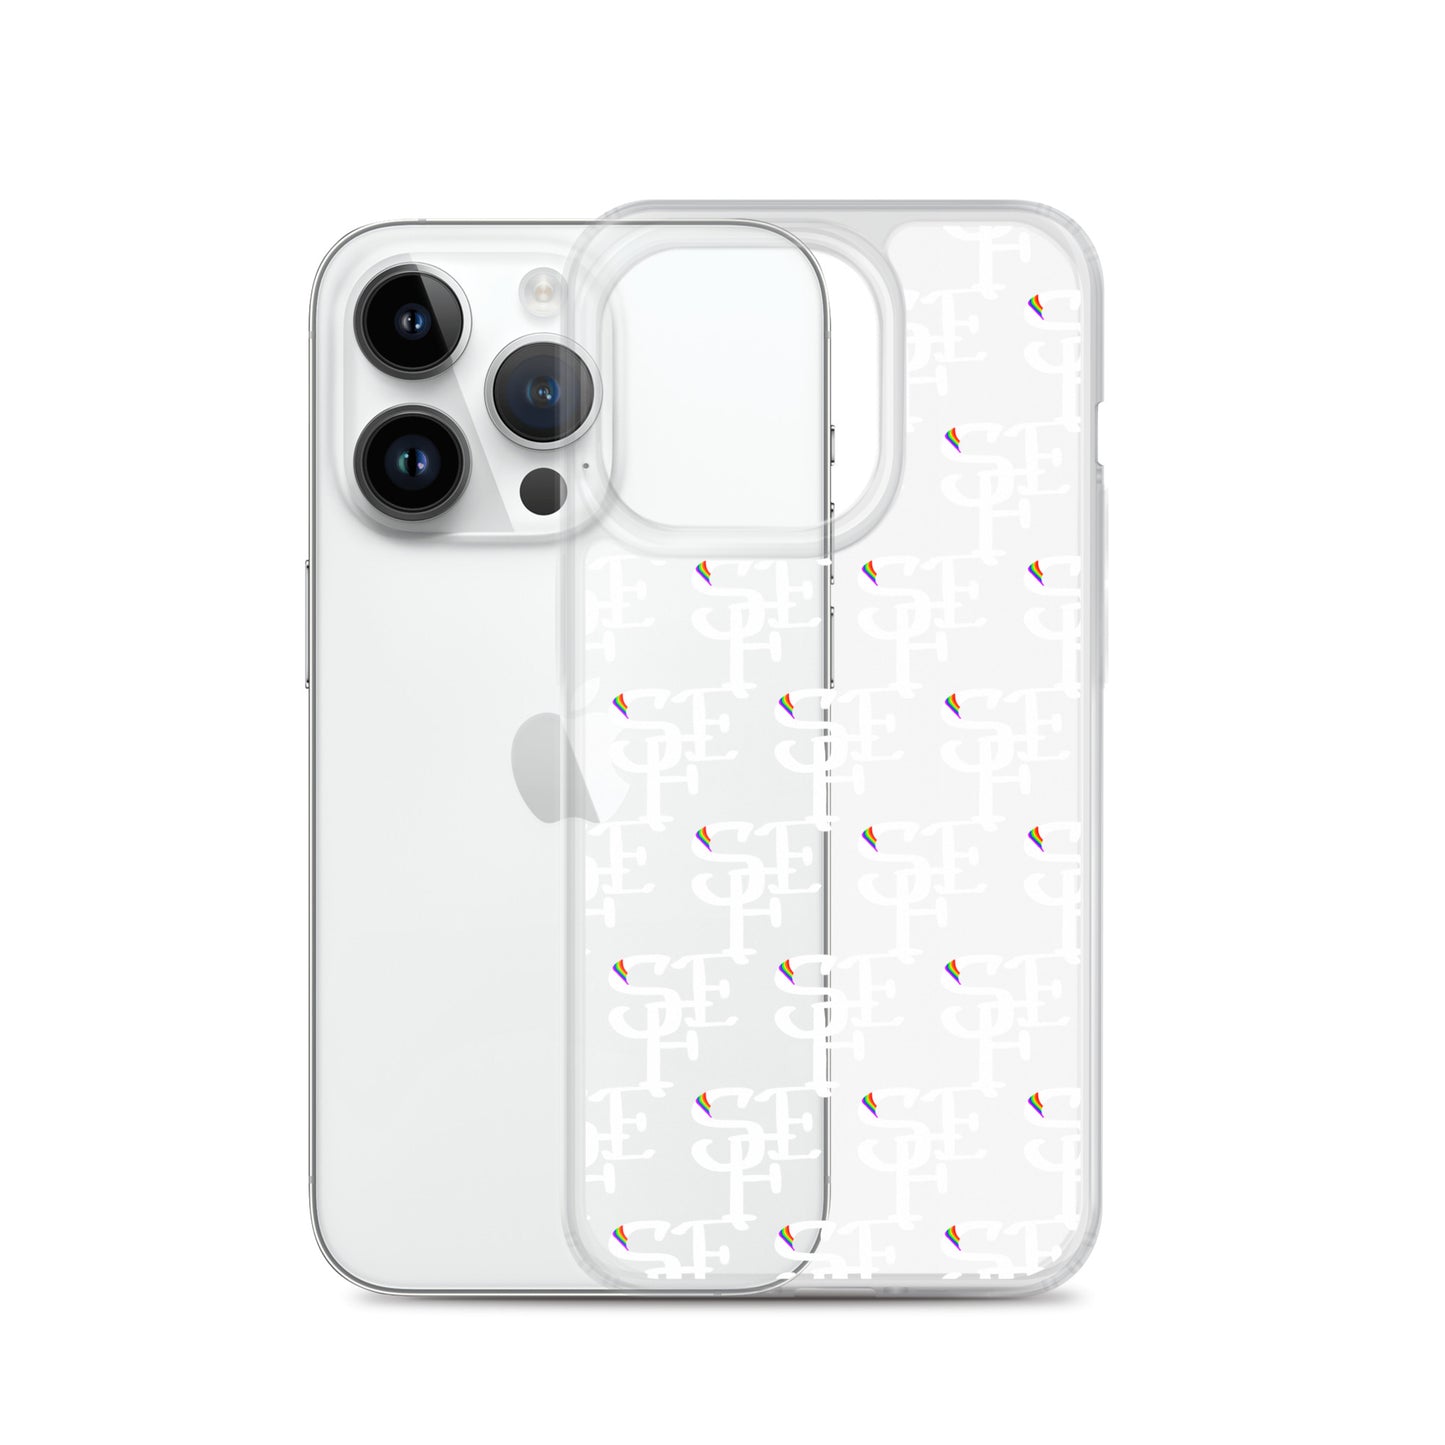 Clear Case for iPhone® - Save From Evil (Pattern)